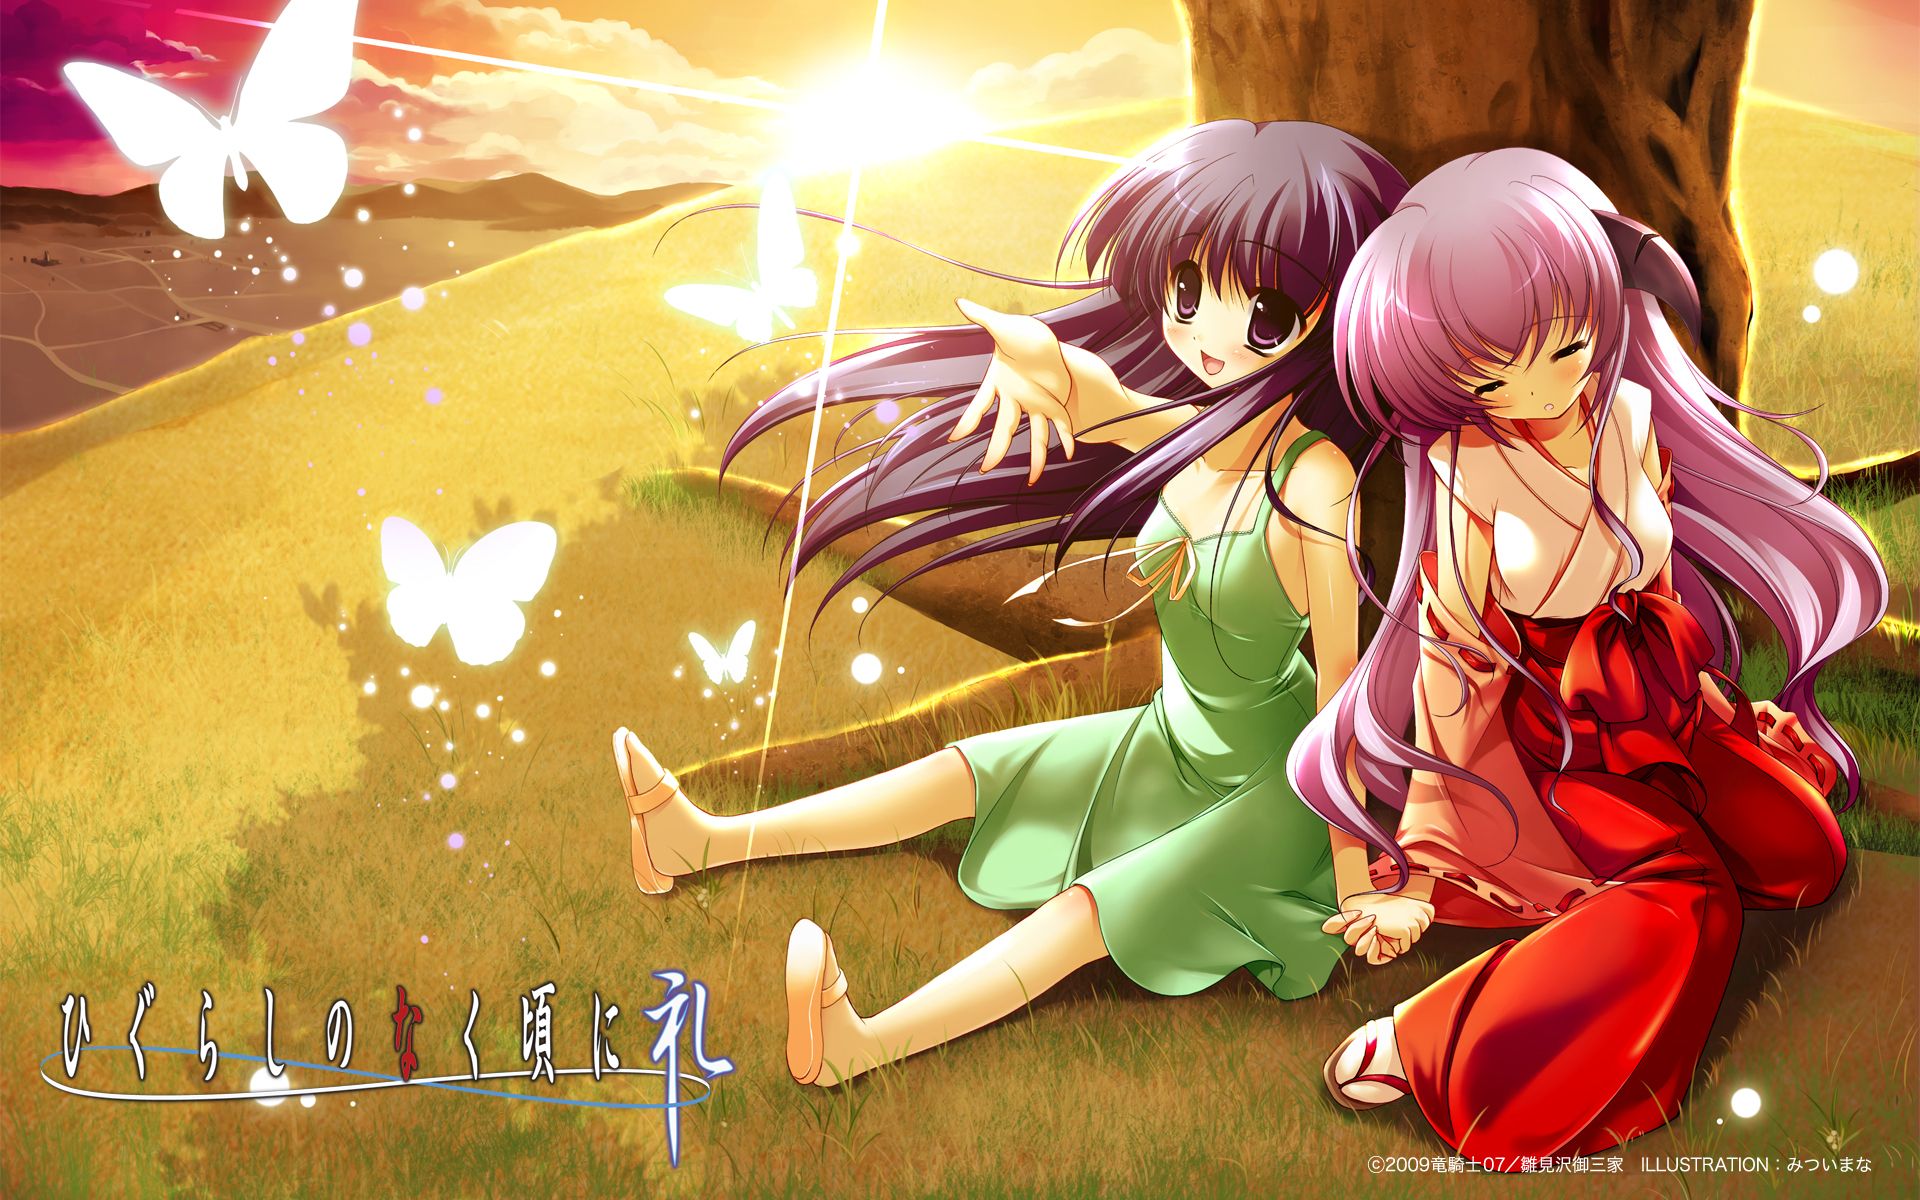 Higurashi When They Cry girls holding hand together very cute